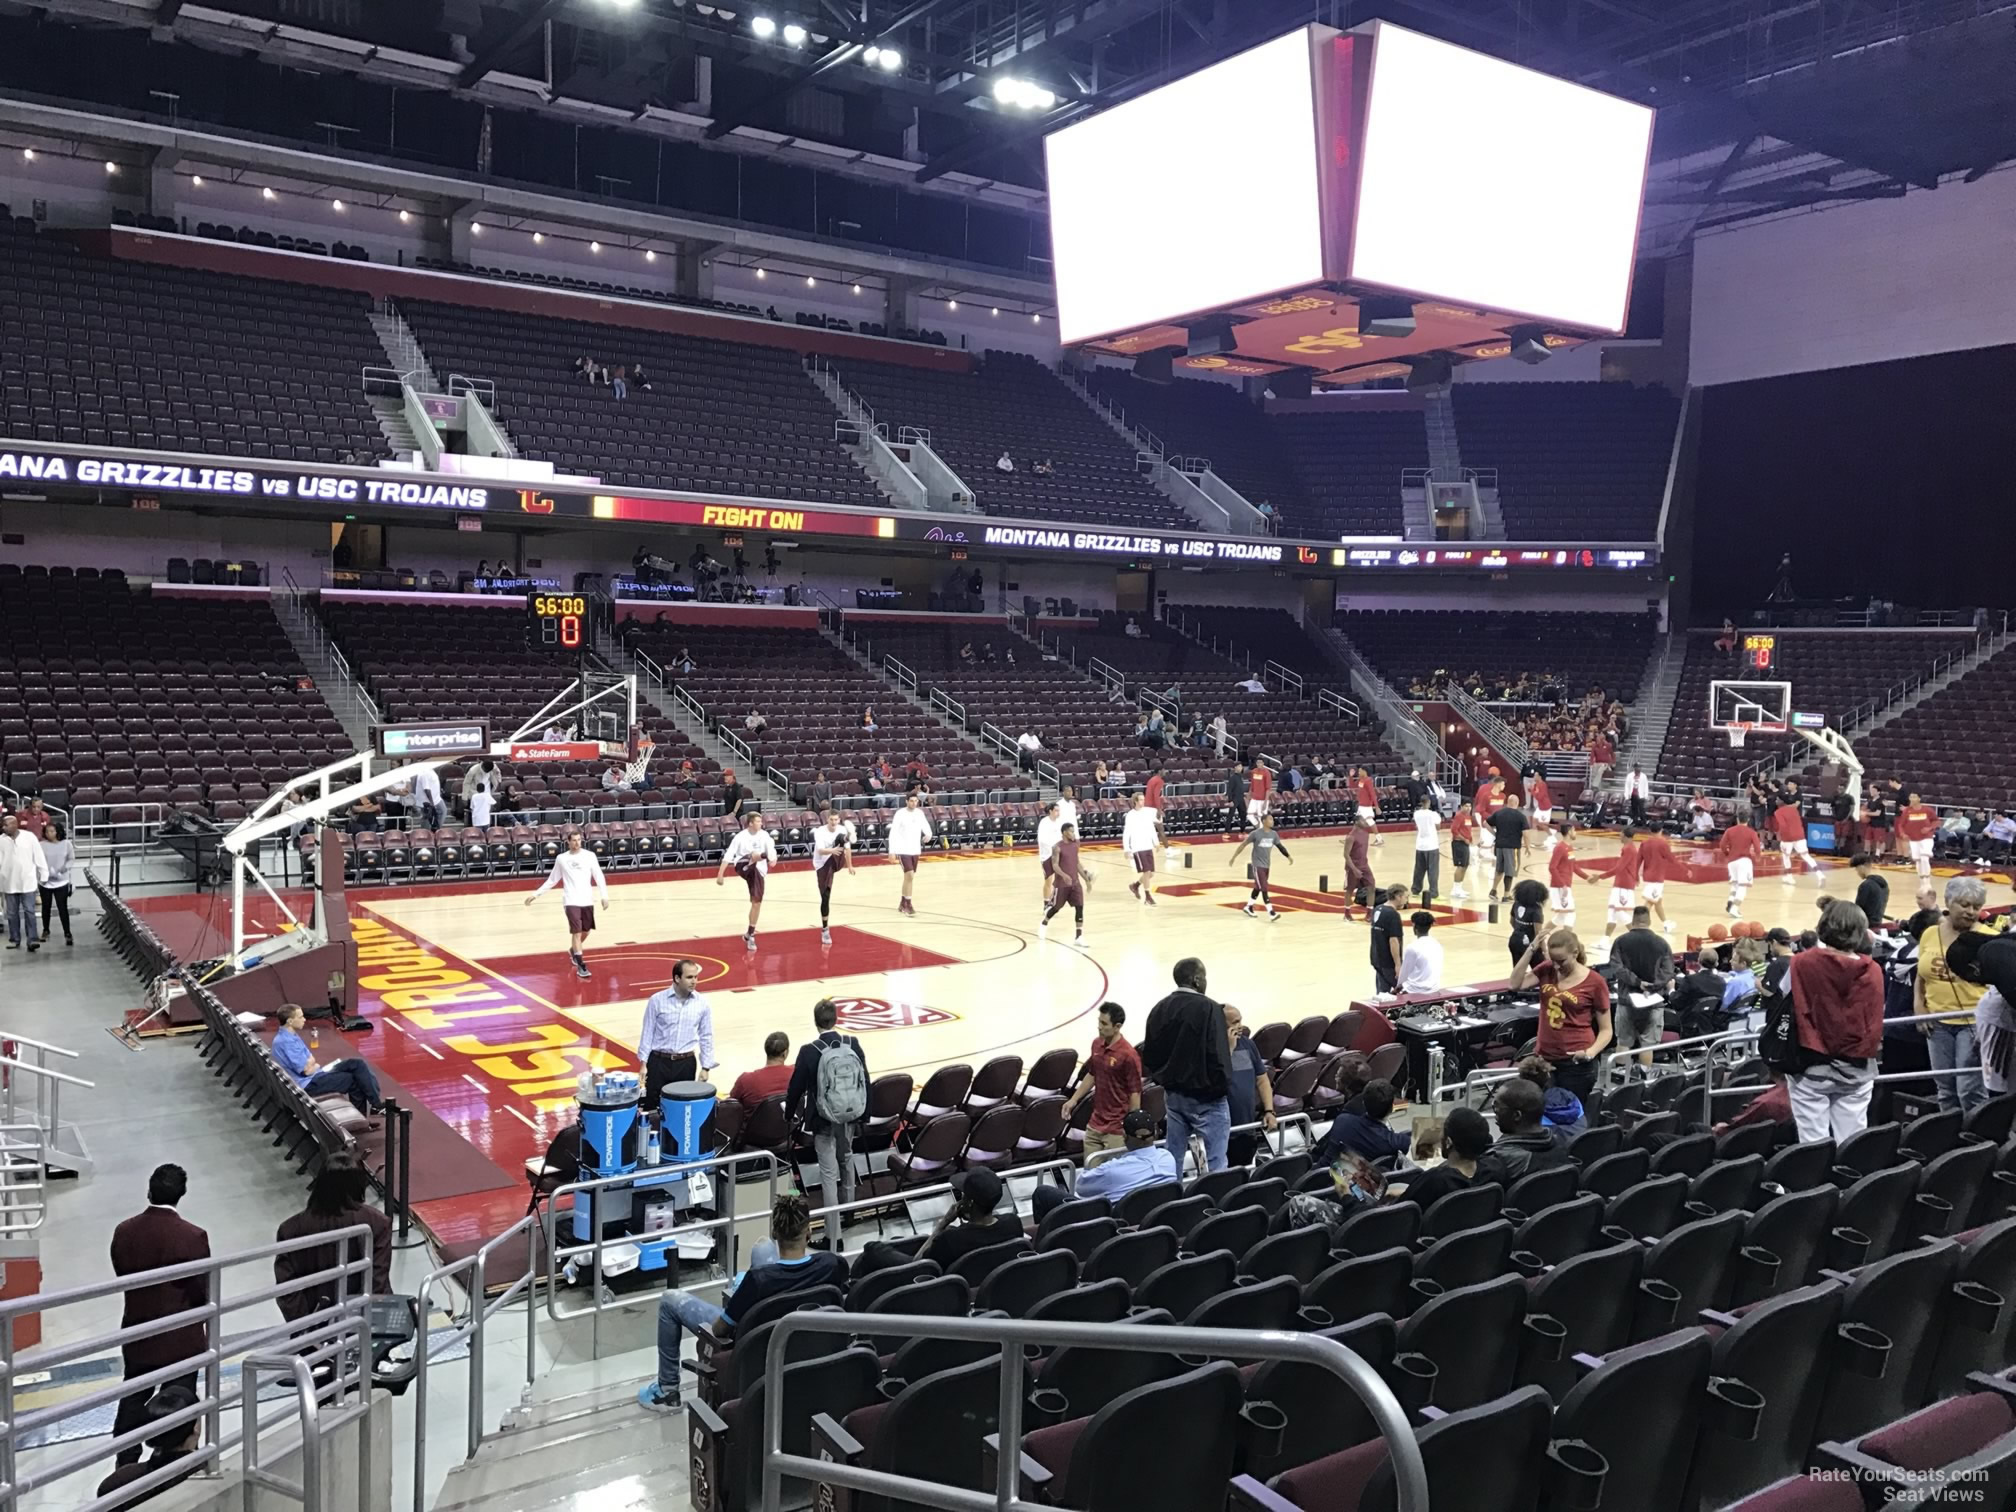 section 113, row 10 seat view  - galen center